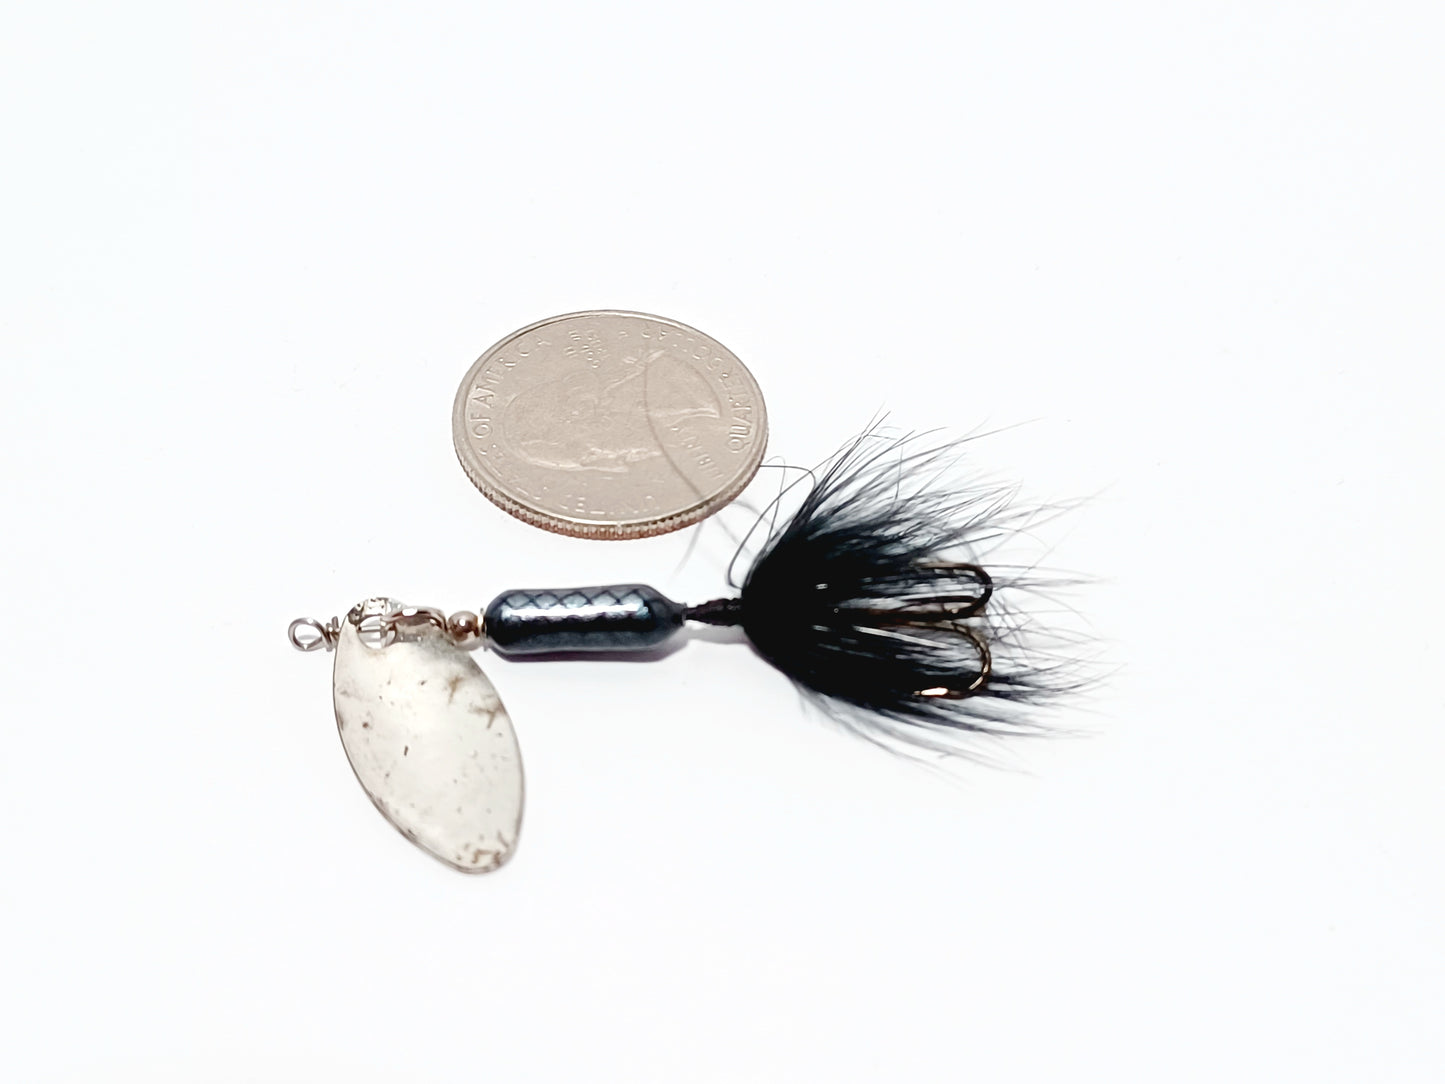 Vintage Mepps ROOSTER TAIL 1/16oz spinning lure black silver